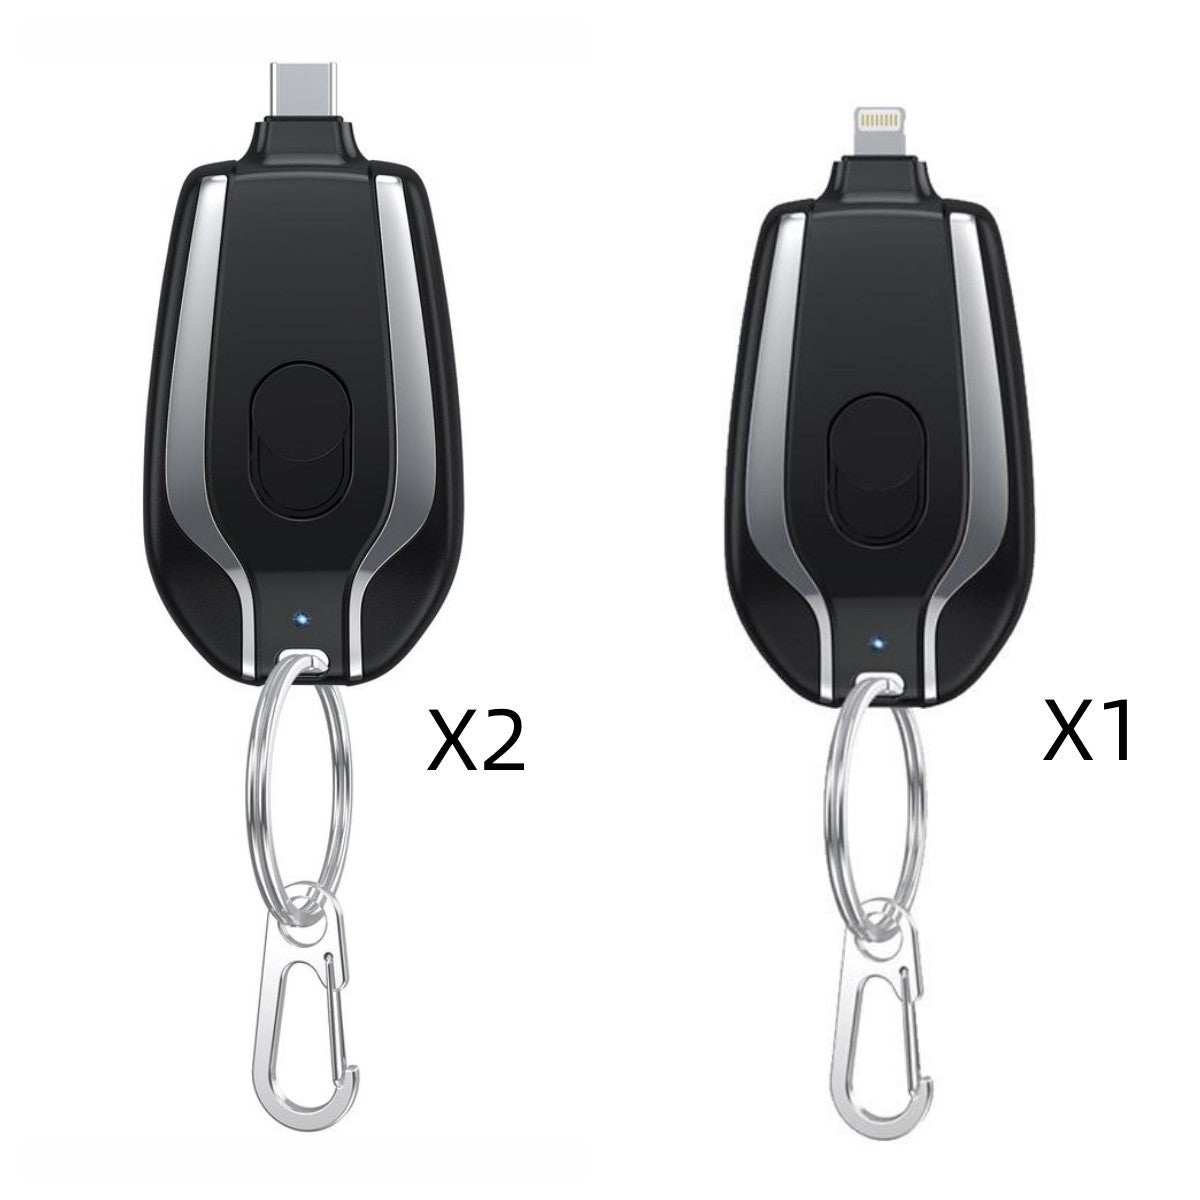 Mini Power Bank Emergency Pod Keychain Charger With Type-C Ultra-Compact Mini Battery Pack Fast Charging Backup Power Bank